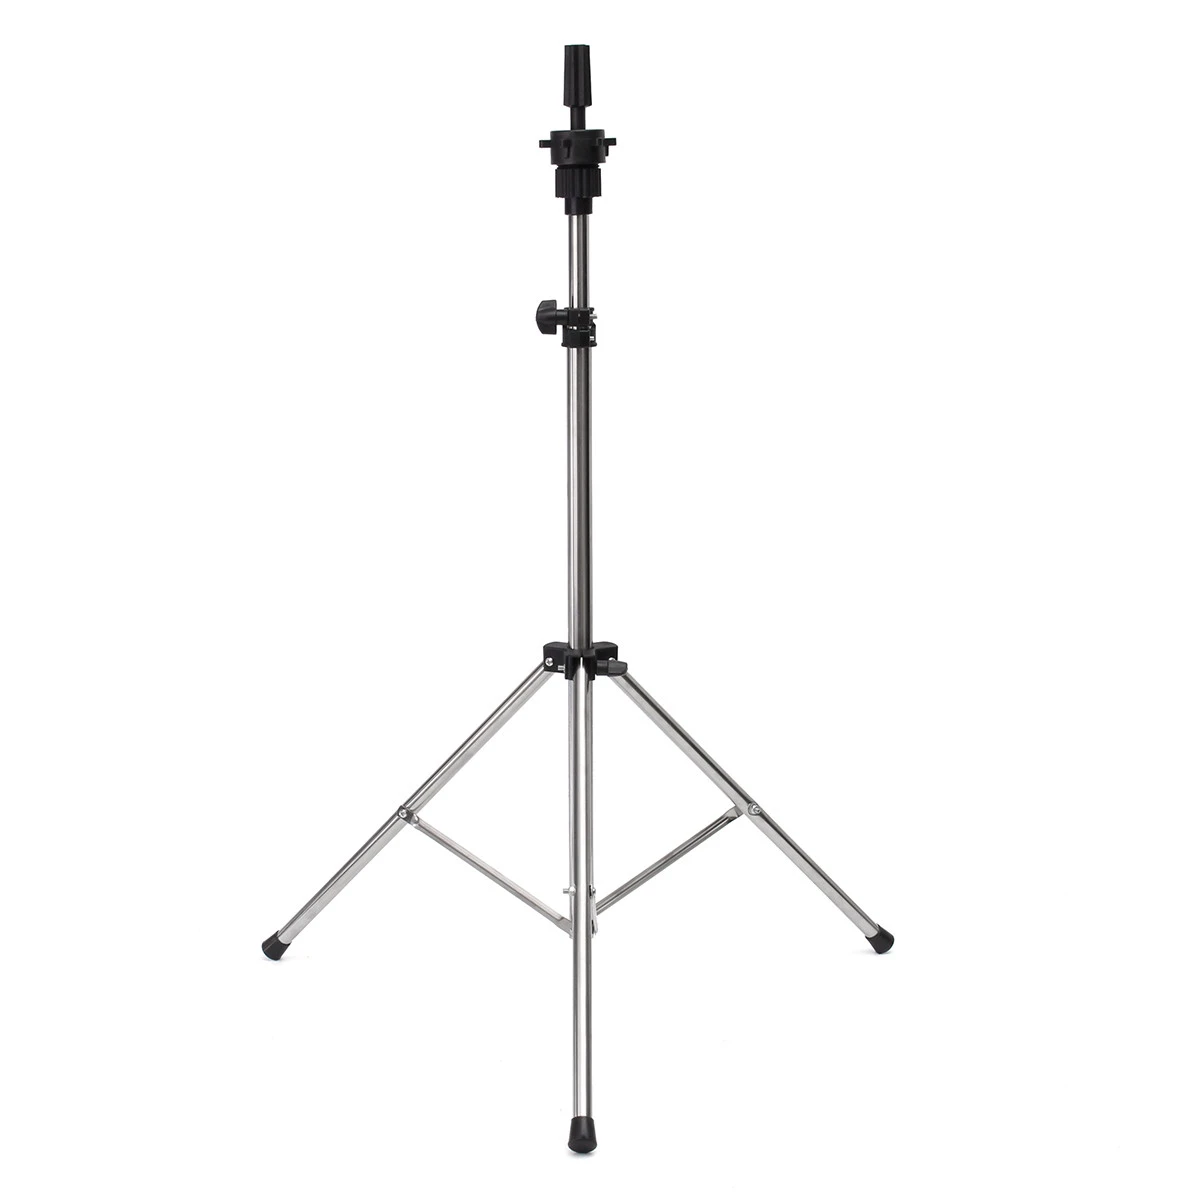 Adjustable Wig Head Tripod Stand Holder for Hairdressing Training Mannequin Practice